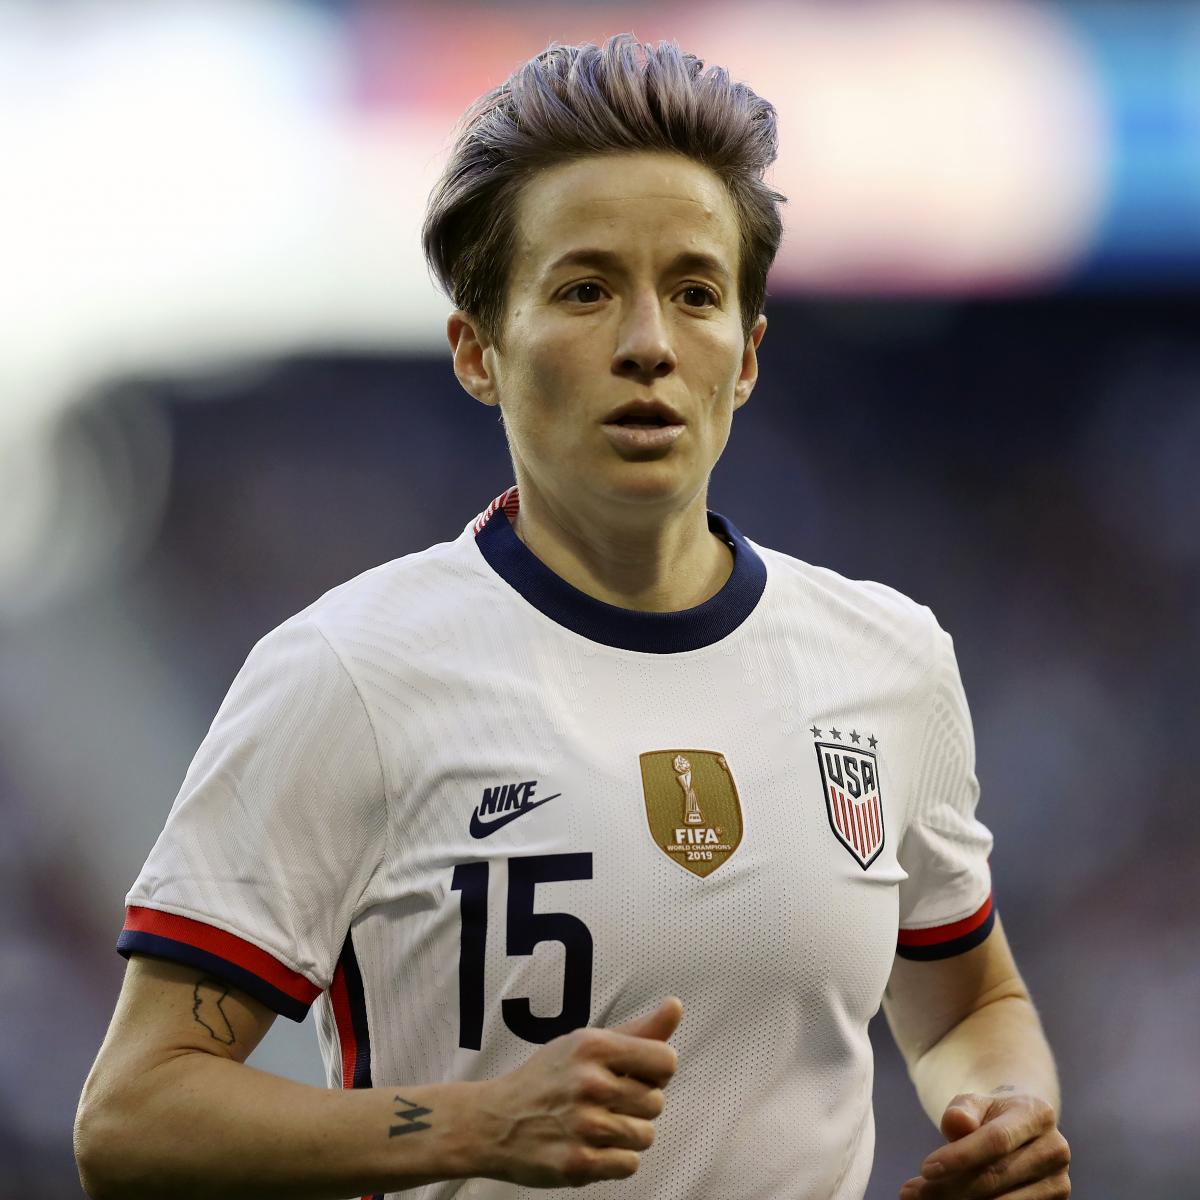 Megan Rapinoe: Lionel Messi, Cristiano Ronaldo May also Attain Extra to Fight Racism